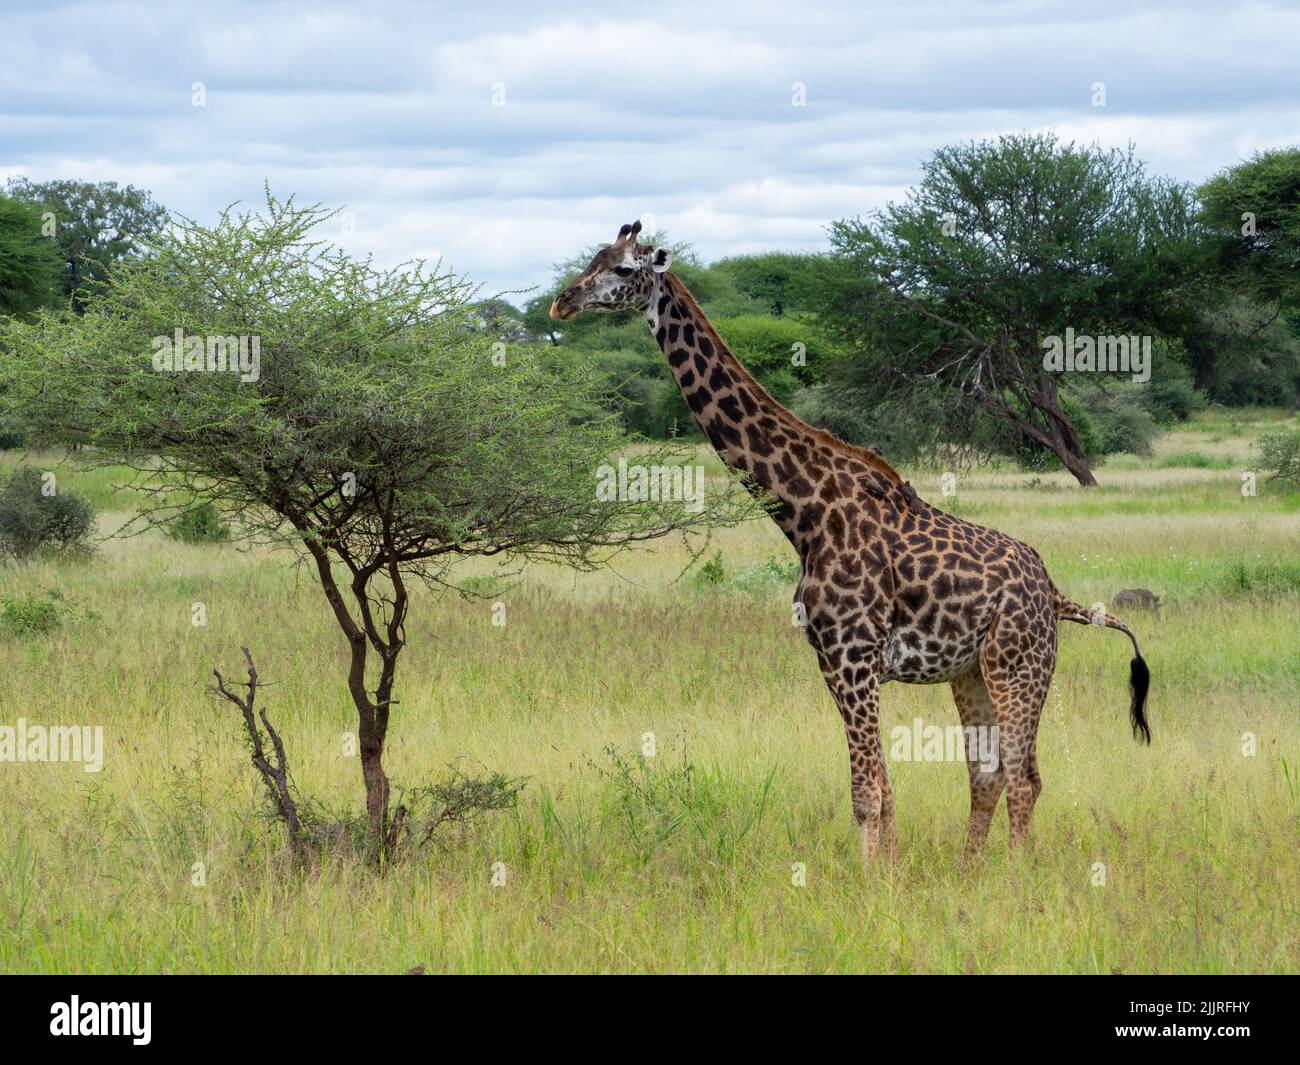 An adult giraffe eating leaves from a tree top on a green meadow in Serengeti National Park, Tanzania Stock Photo